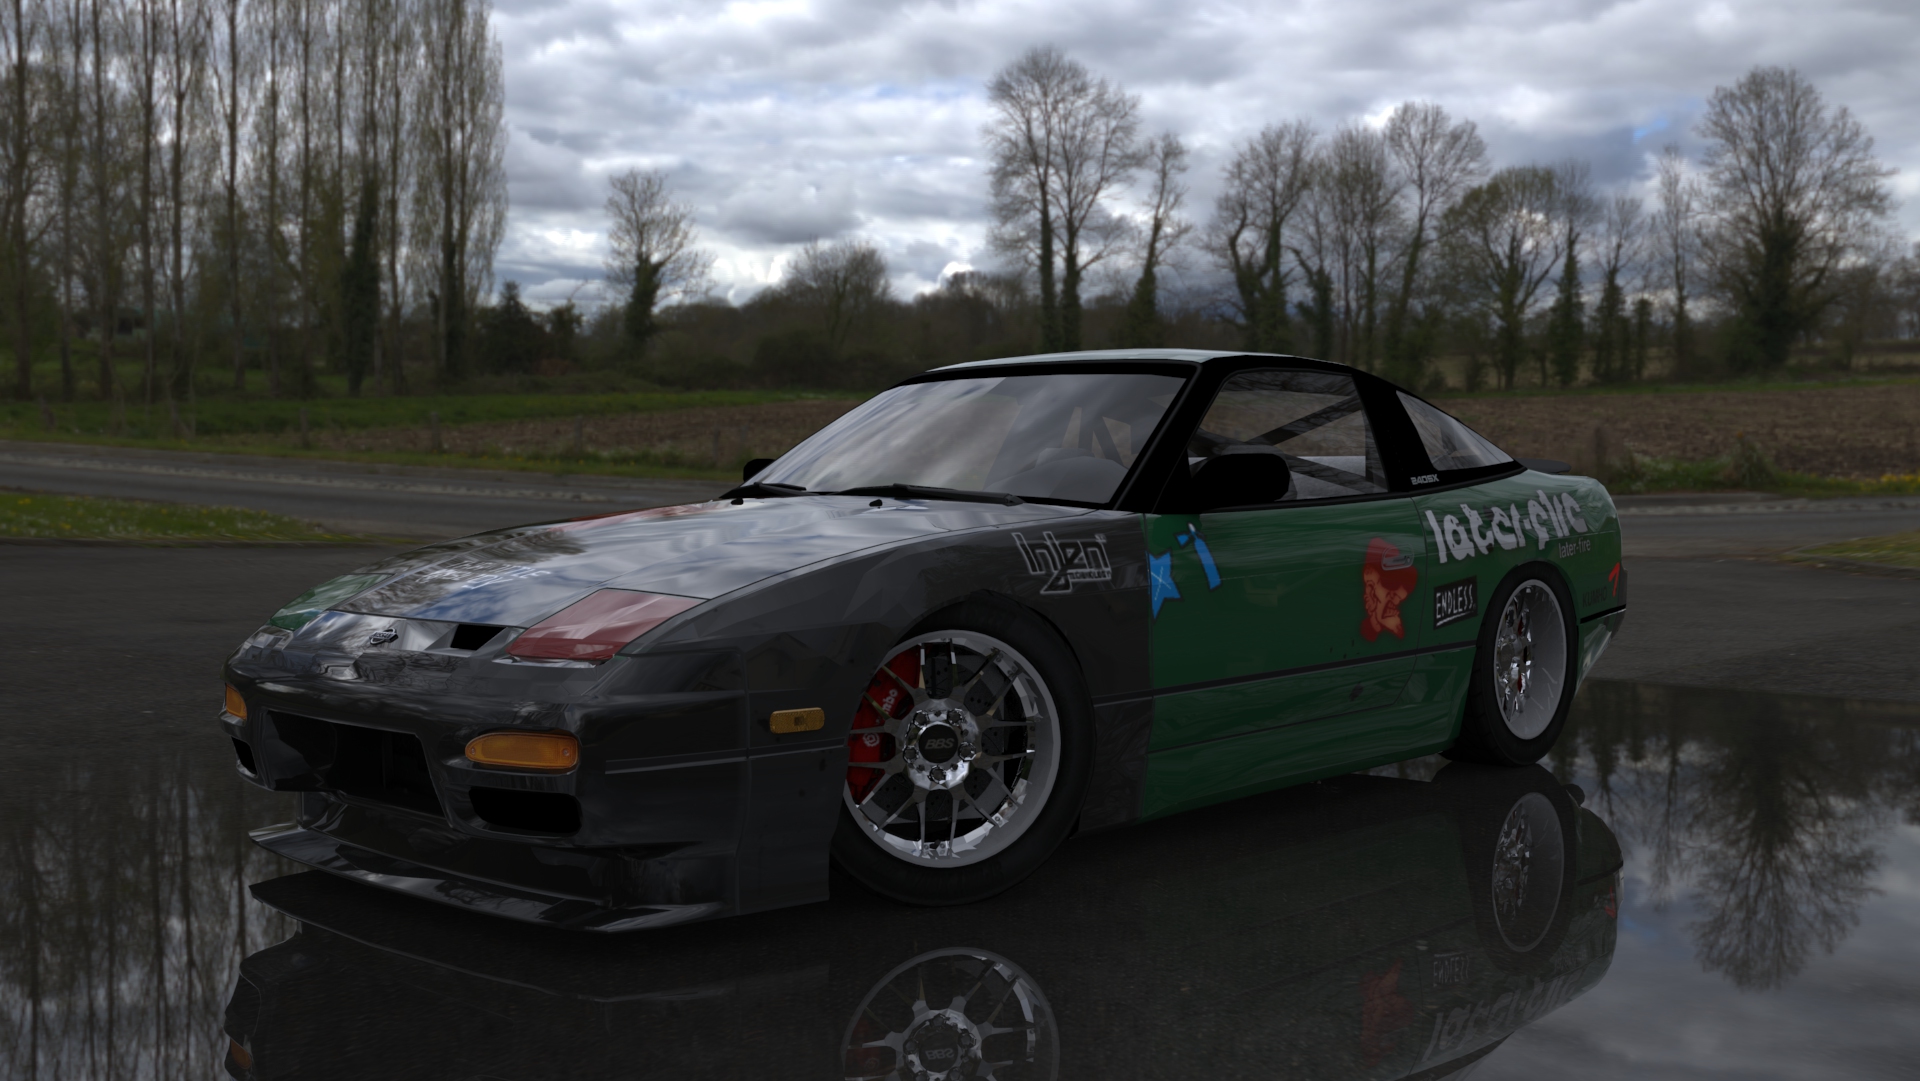 General 1920x1081 Nissan 240SX Ryan Cooper Need for Speed: ProStreet pop-up headlights Nissan Japanese cars video games Electronic Arts